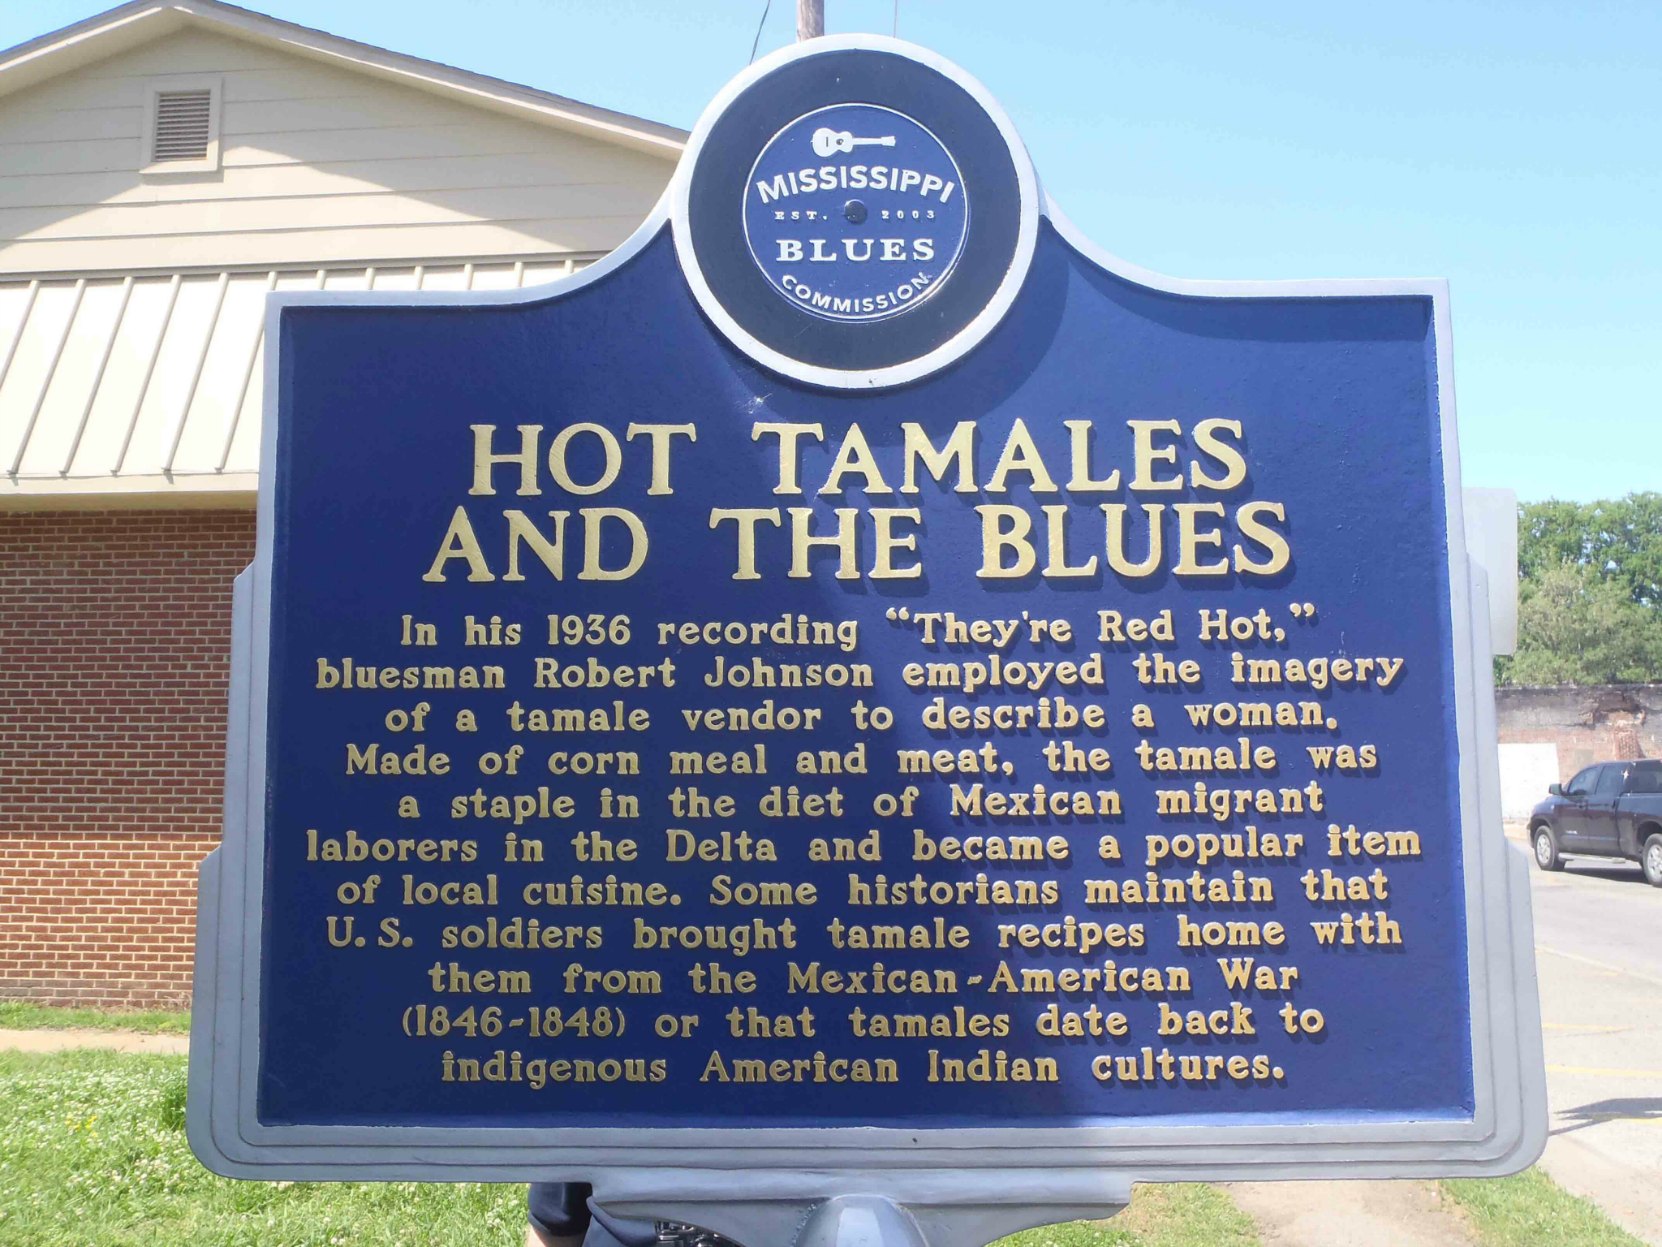 Mississippi Blues Trail marker commemorating Hot Tamales And The Blues, Rosedale, Mississippi